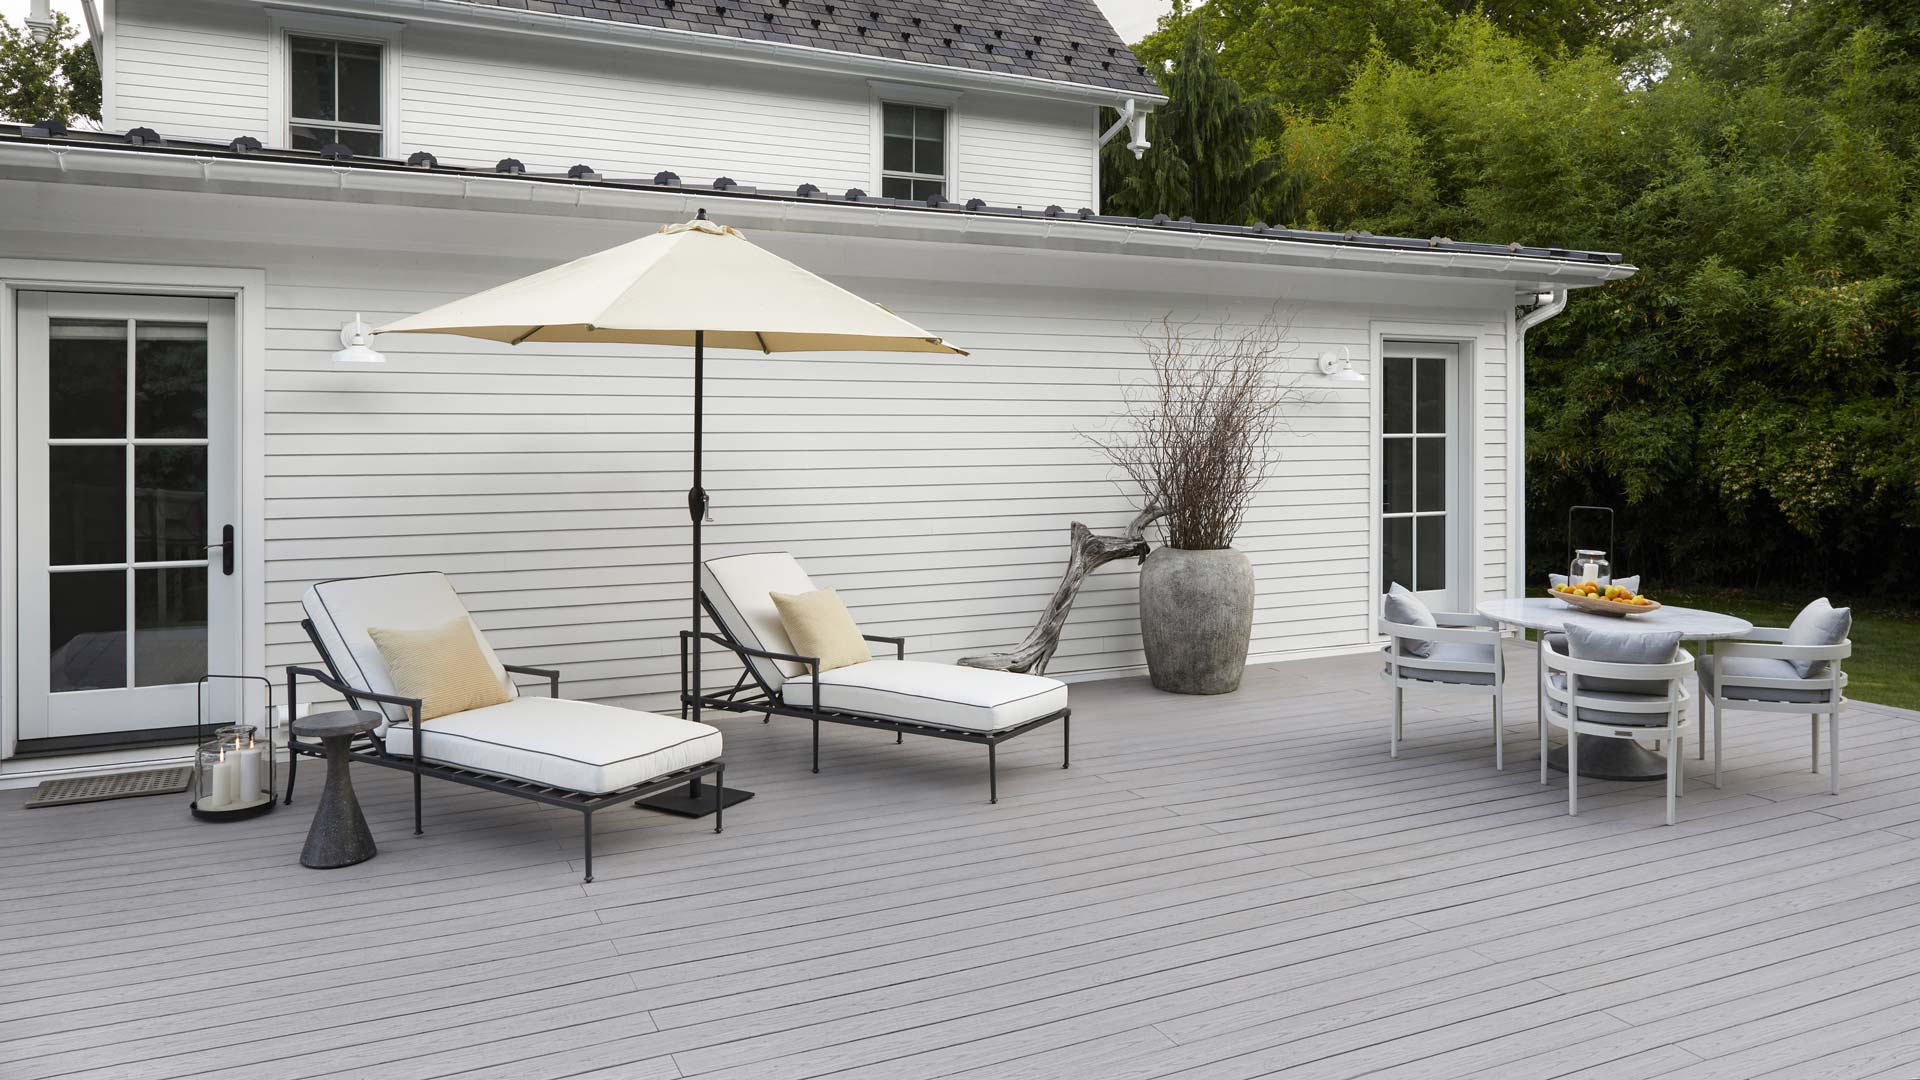 A shot of Danny Seo's new Slate Gray deck and all of his outdoor furniture from afar